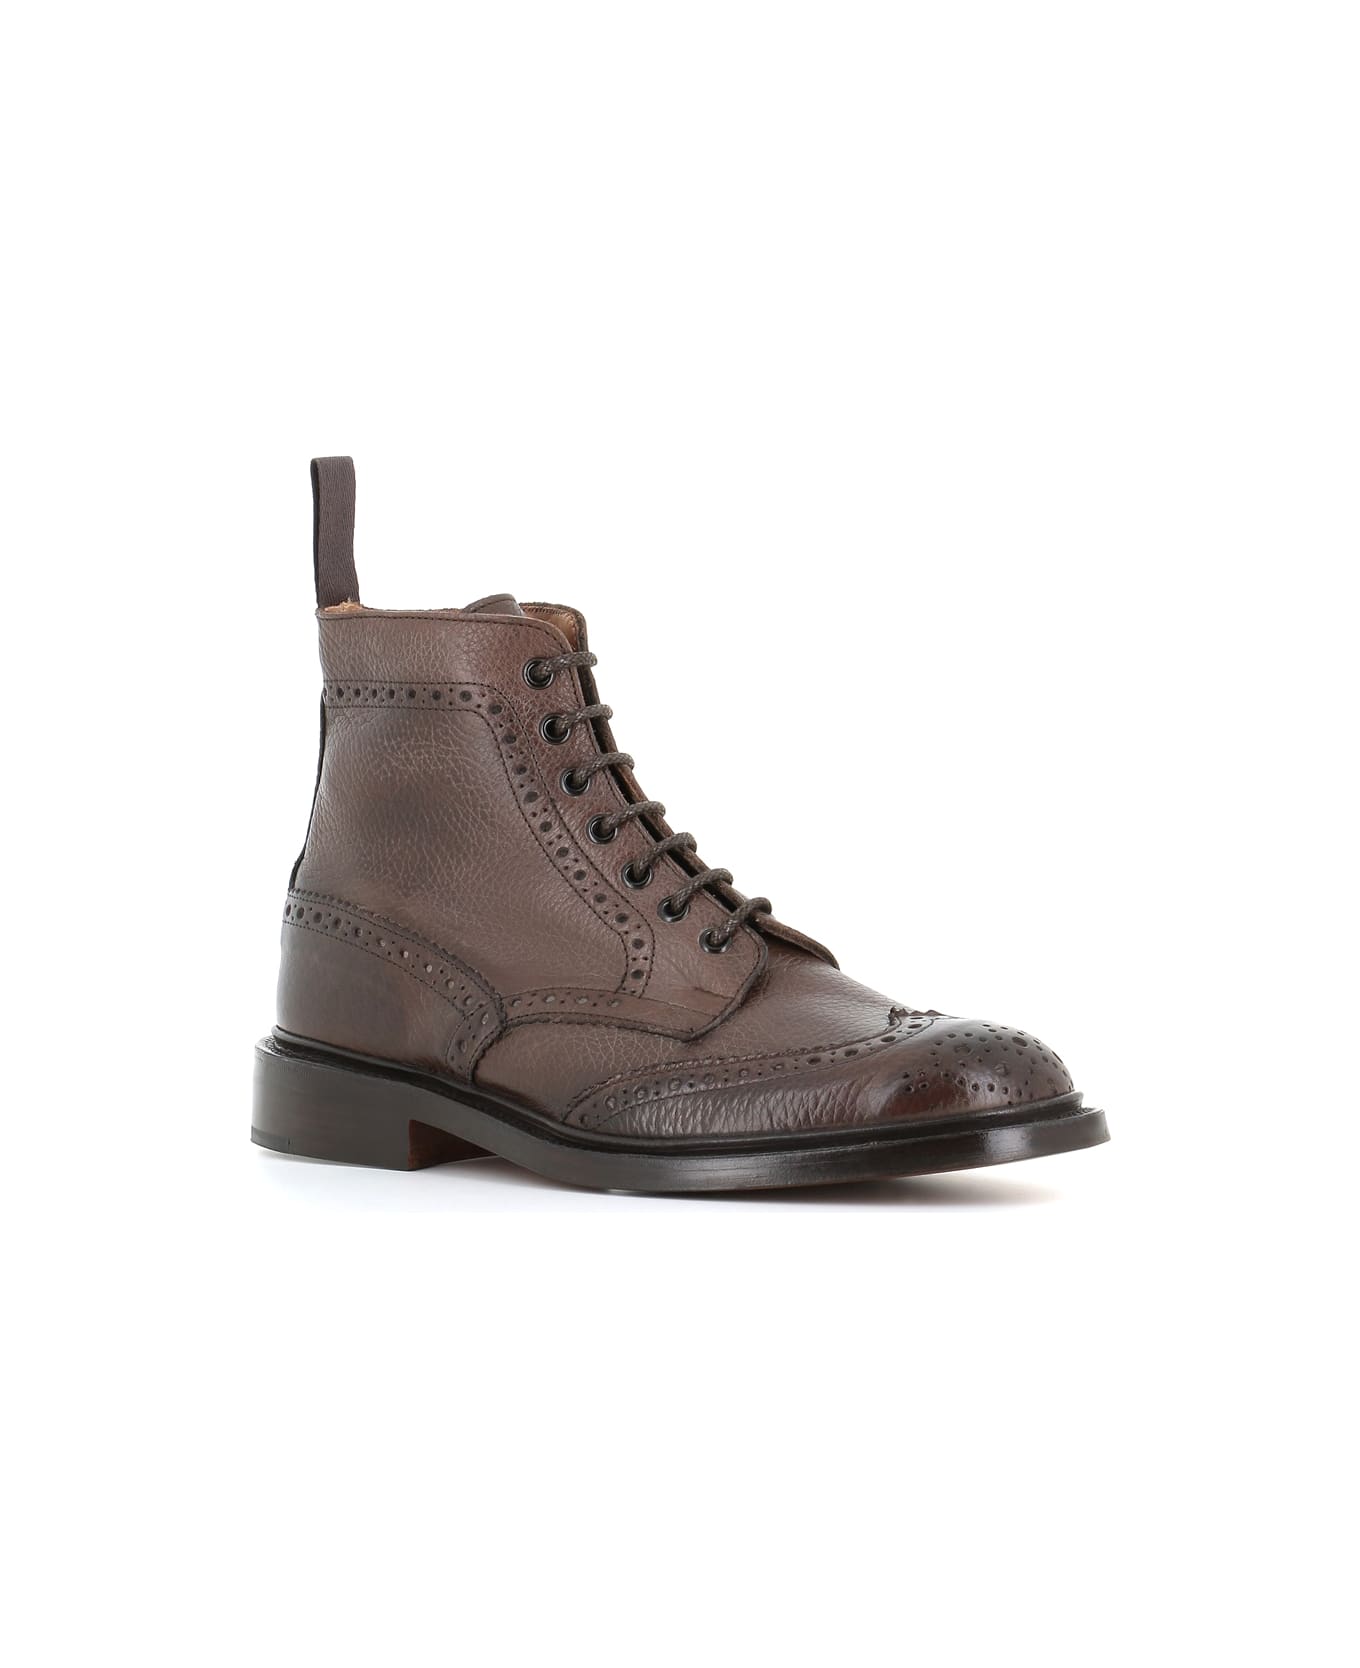 Tricker's Stow Country Boot - Dark brown ブーツ